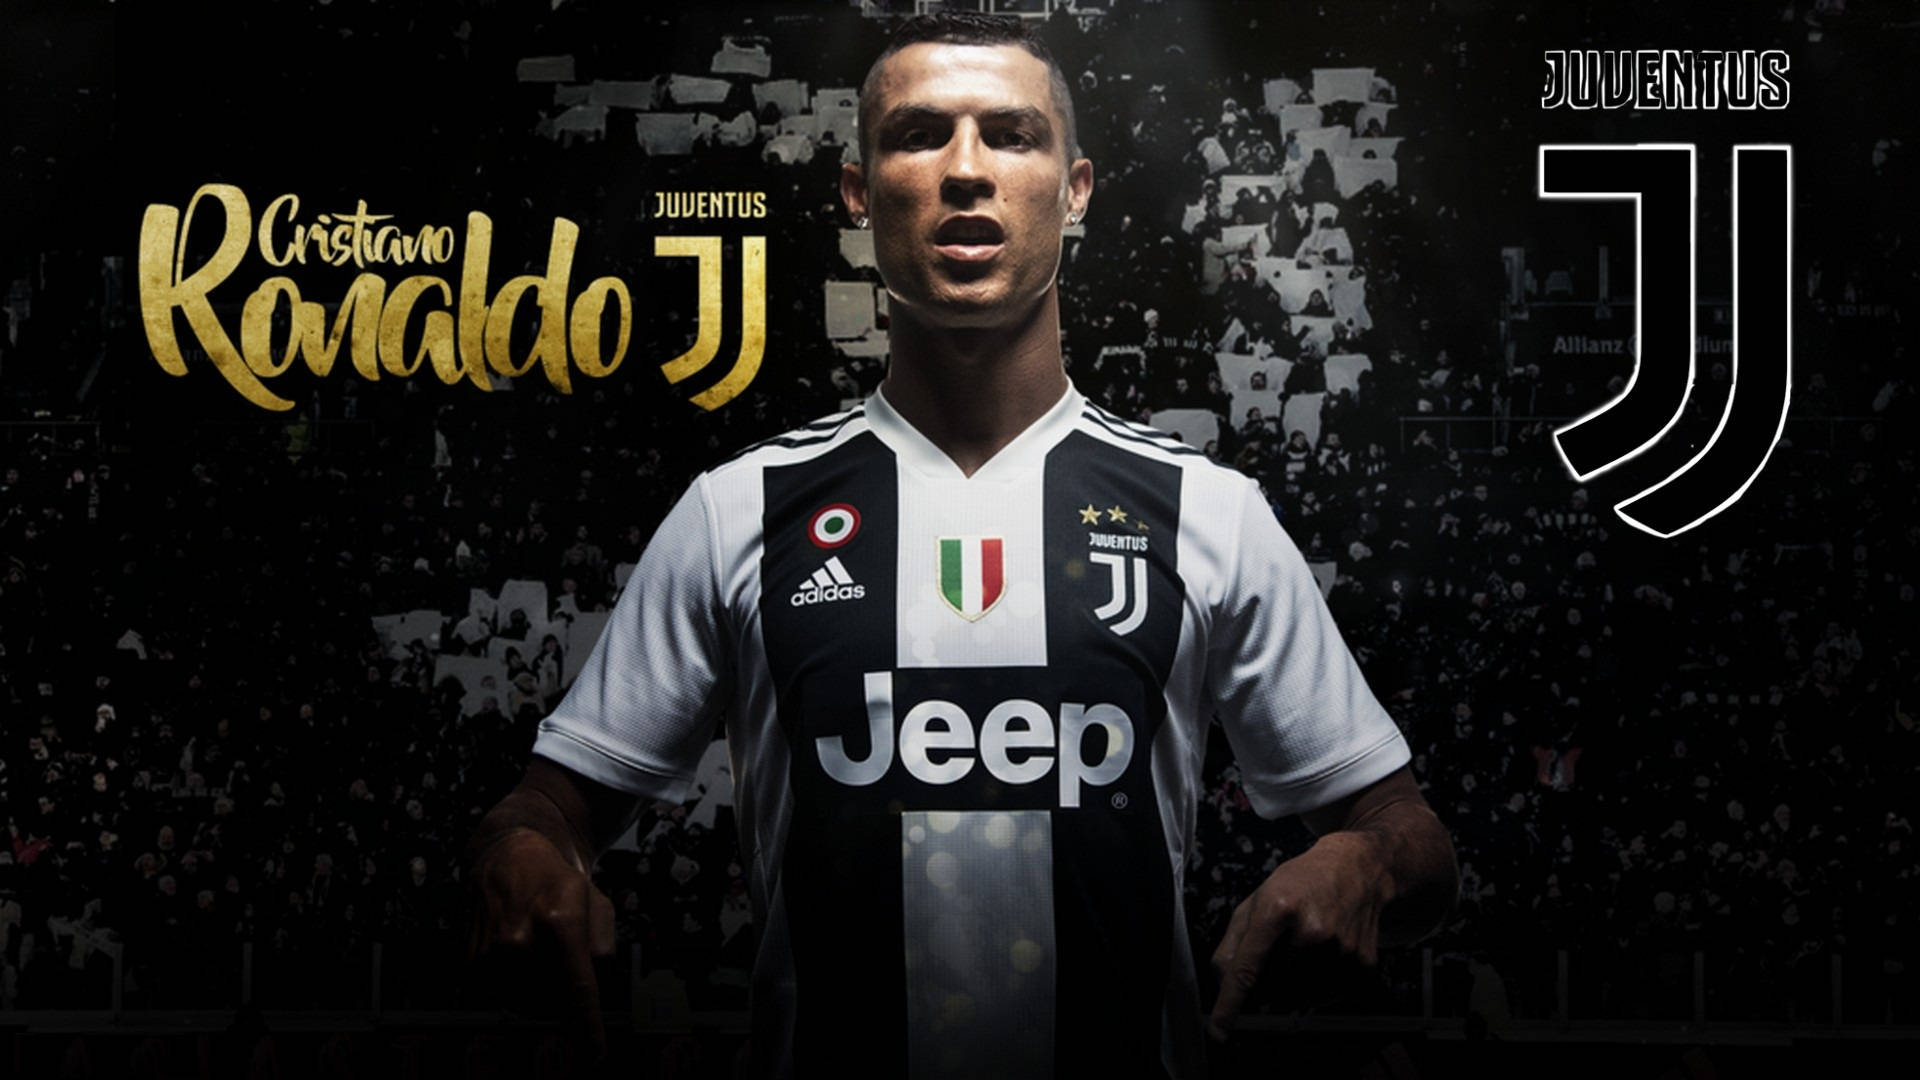 Cristiano Ronaldo in his home jersey as he prepares to take the field as part of the mighty Juventus squad Wallpaper